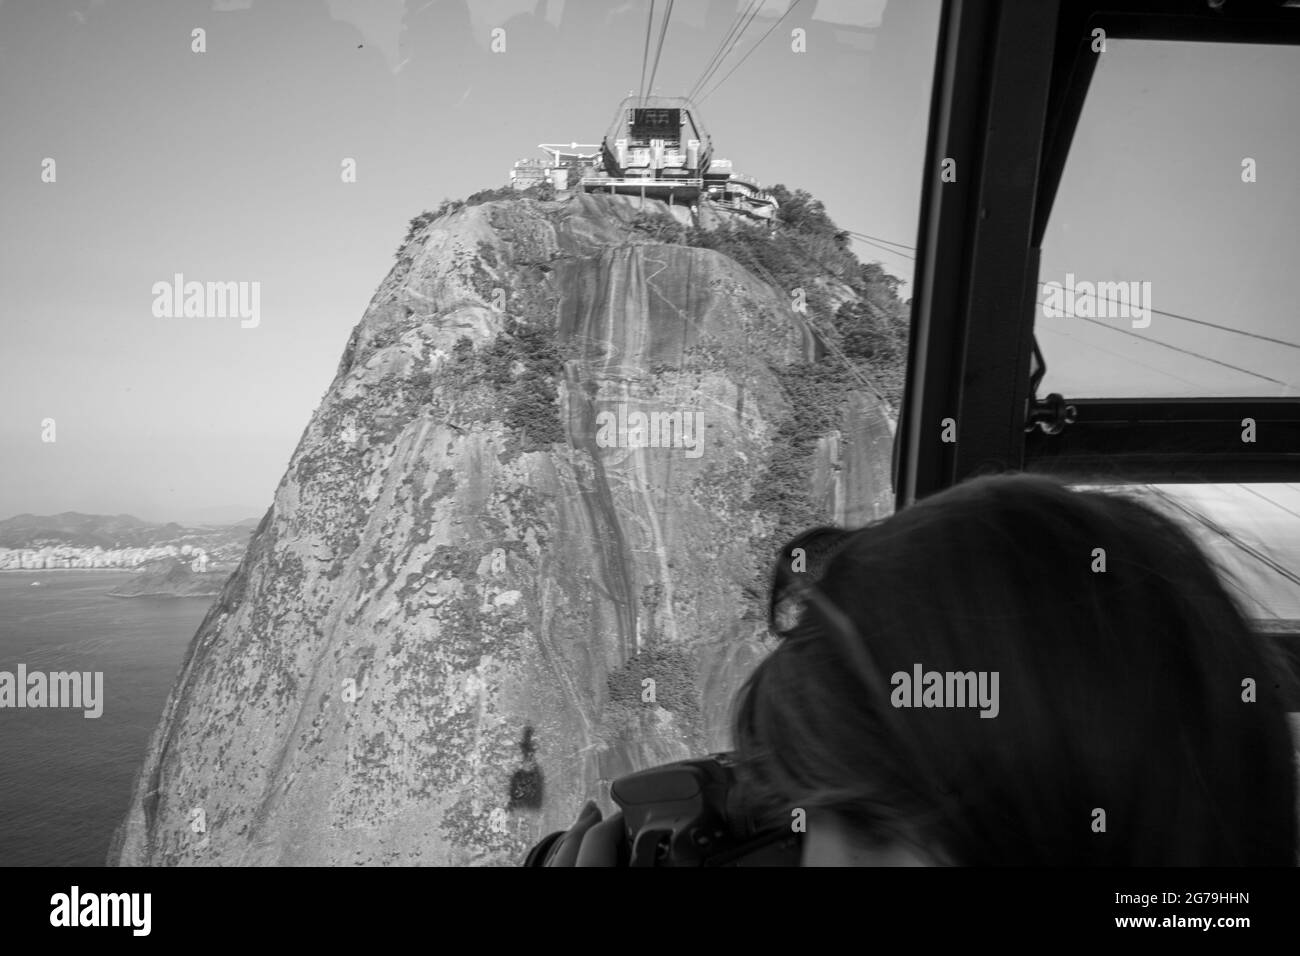 View of the Sugar loaf Mountain from inside the cable car that accesses the upper part of the hill. Stock Photo